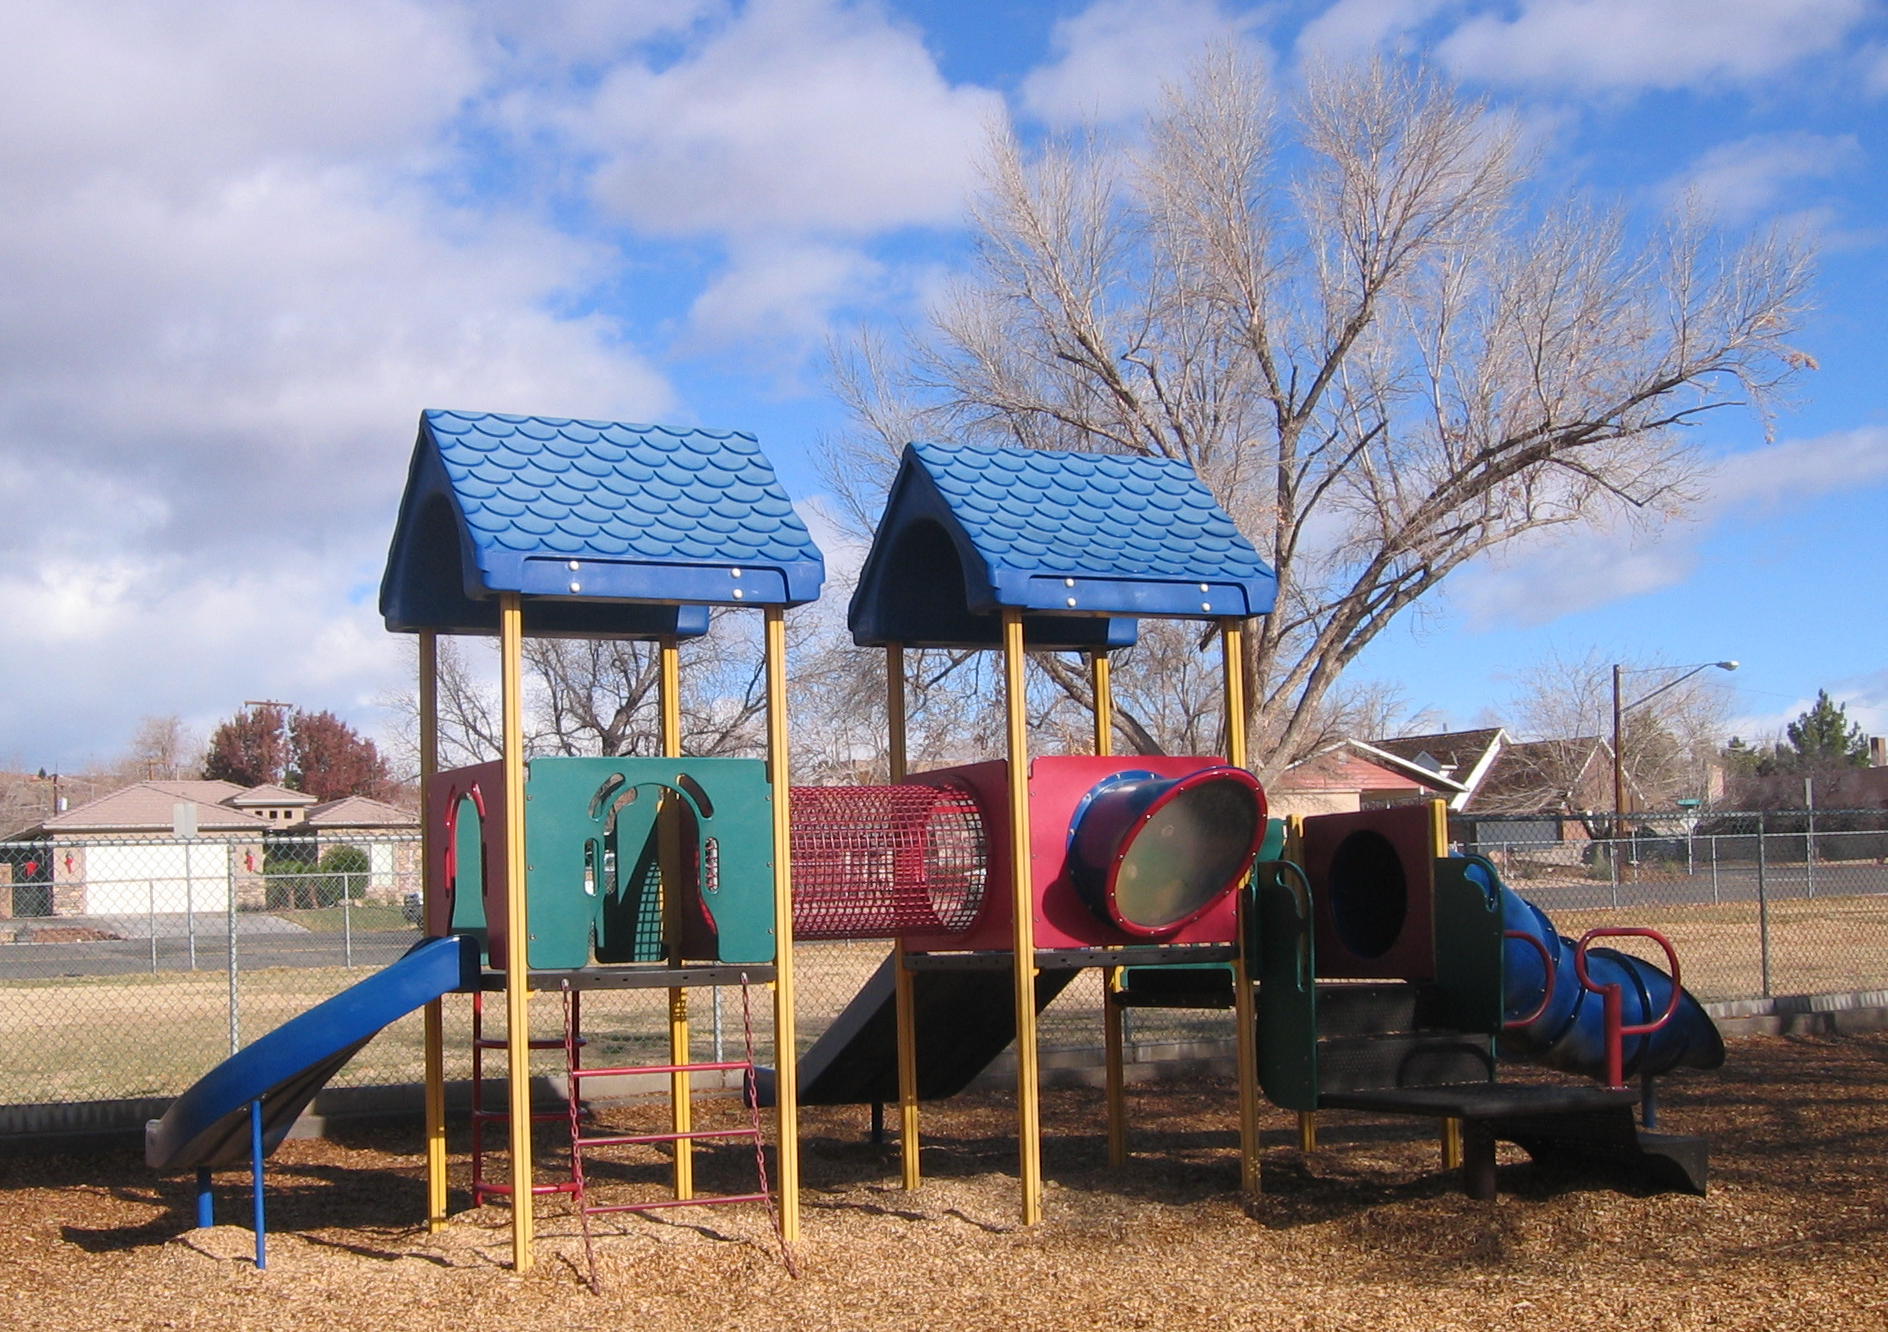 North playground at East Elementary School